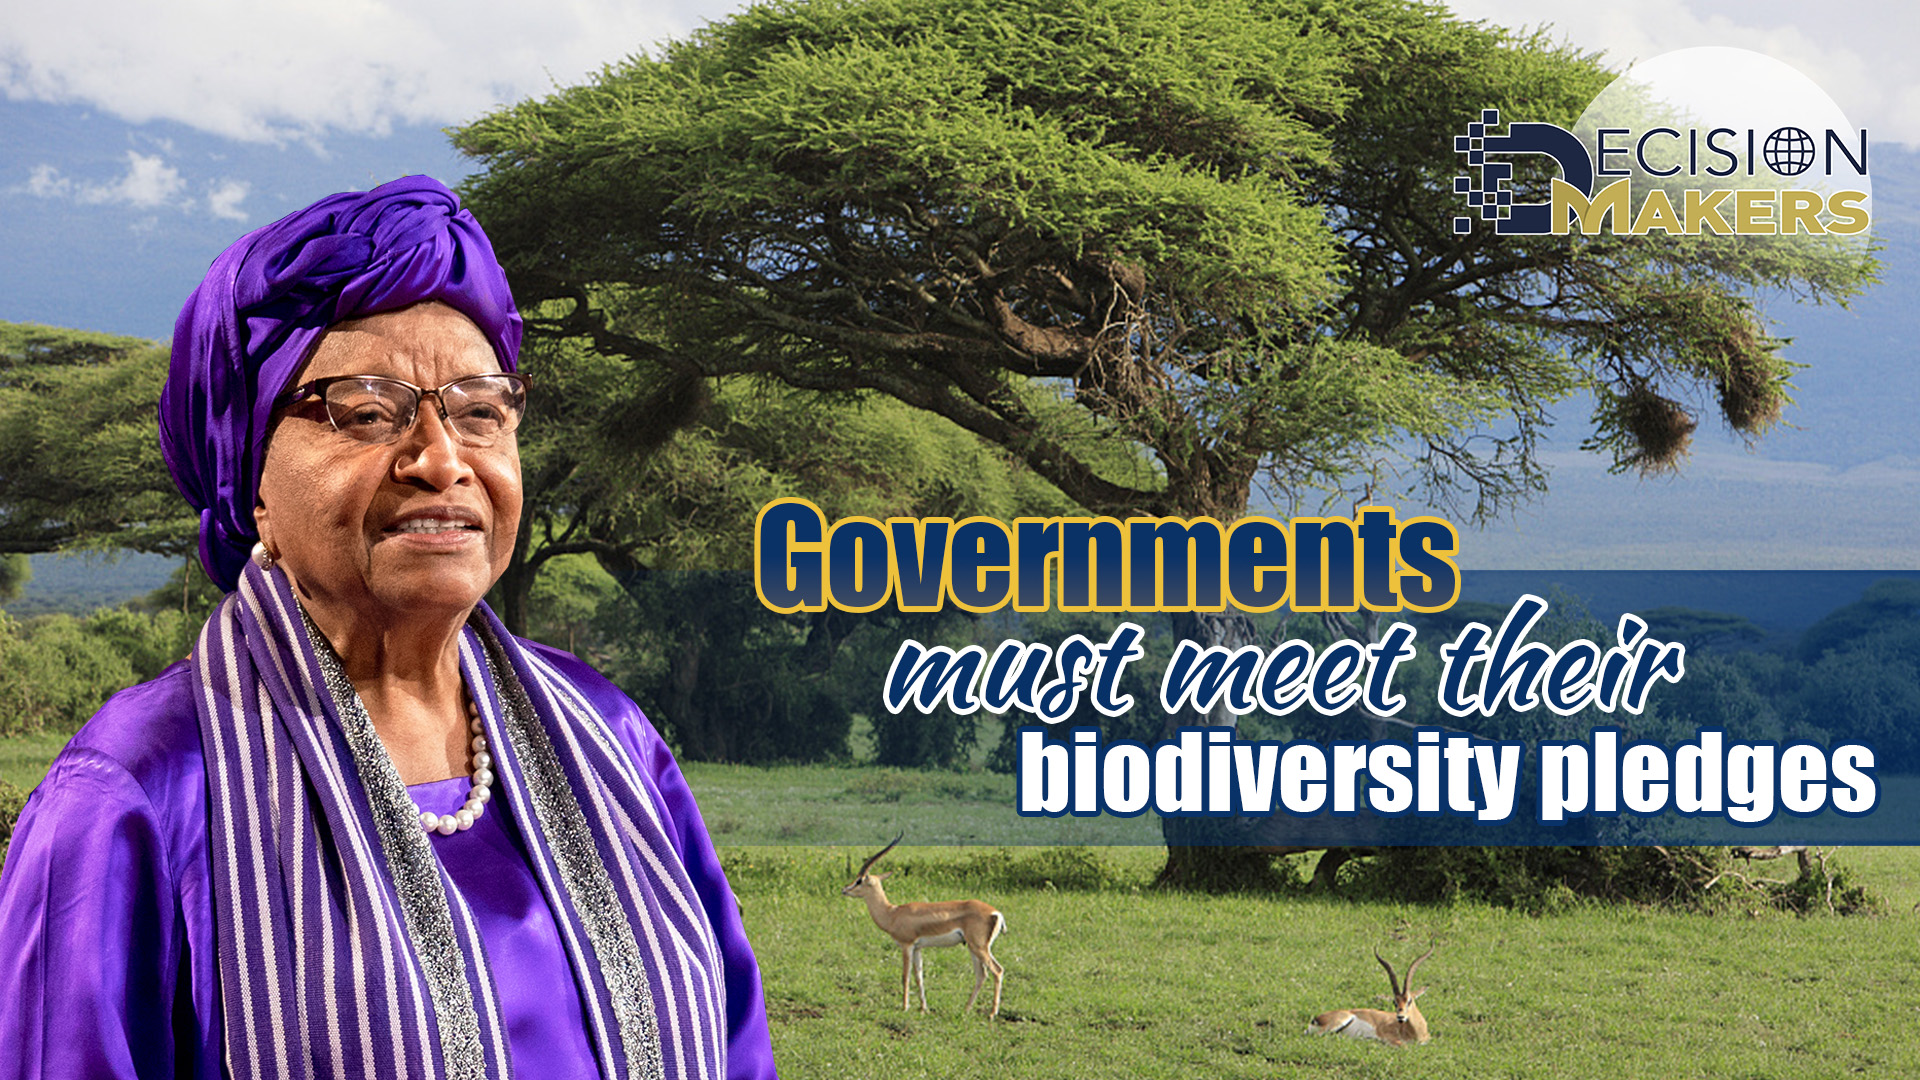 Governments must meet their biodiversity pledges